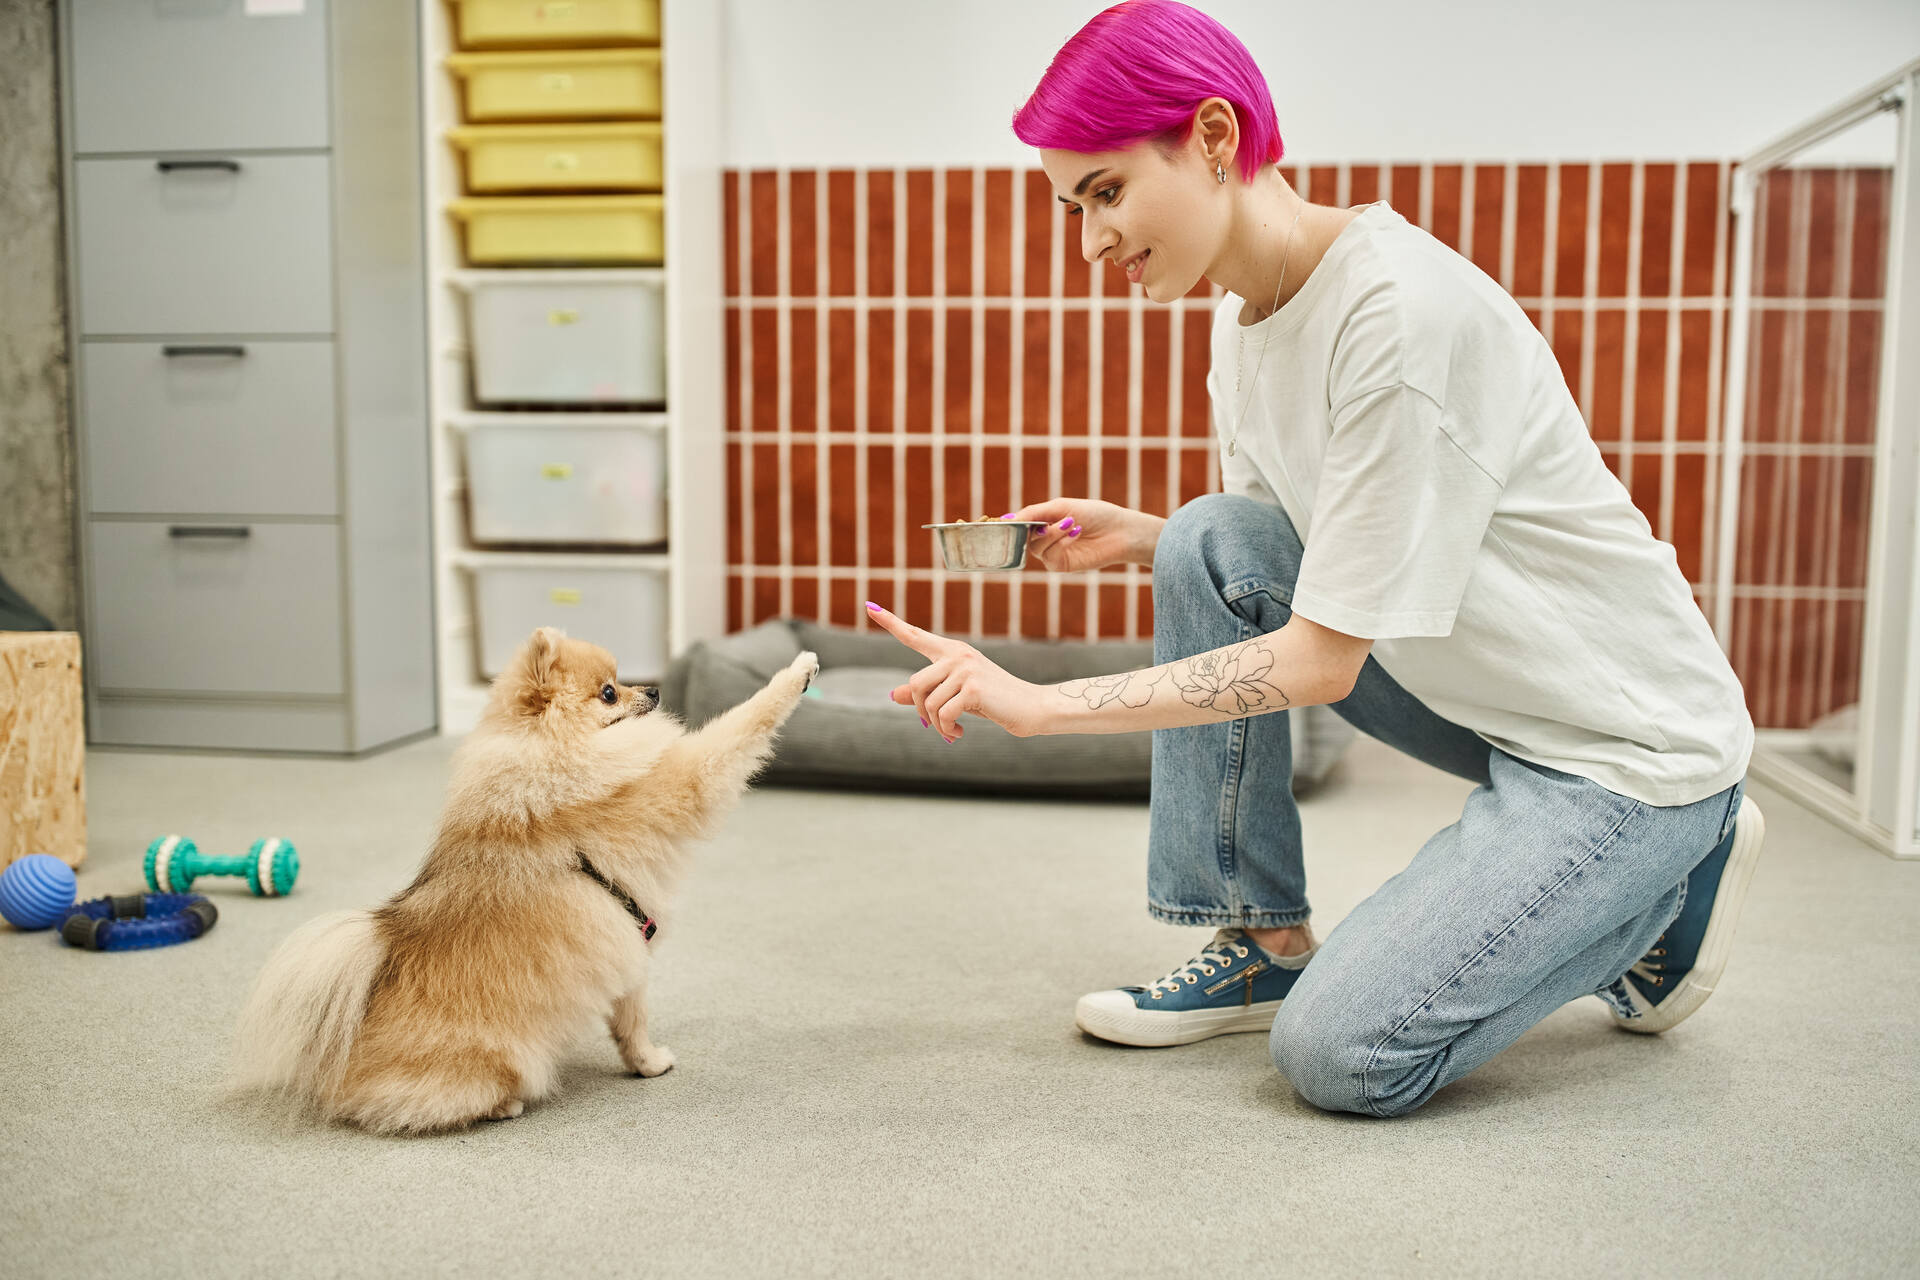 A woman training a dog indoors